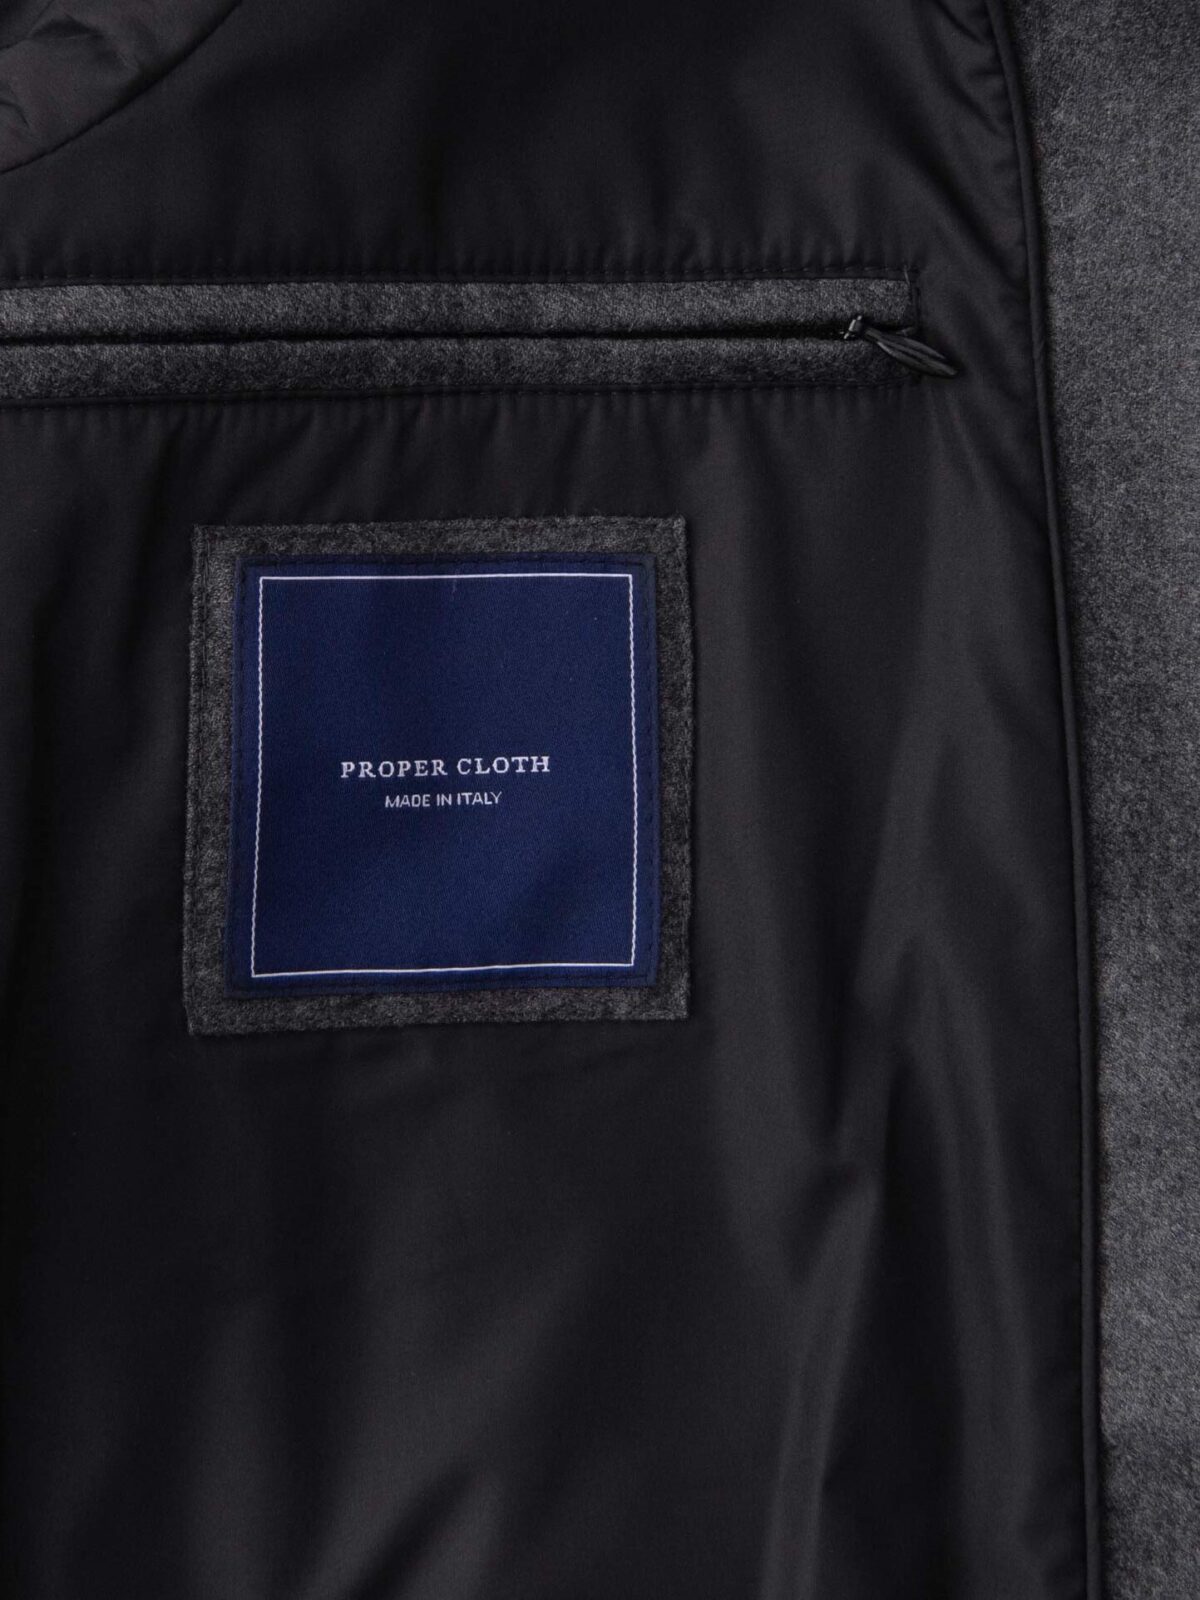 Lucca Grey Wool and Cashmere Flannel Jacket